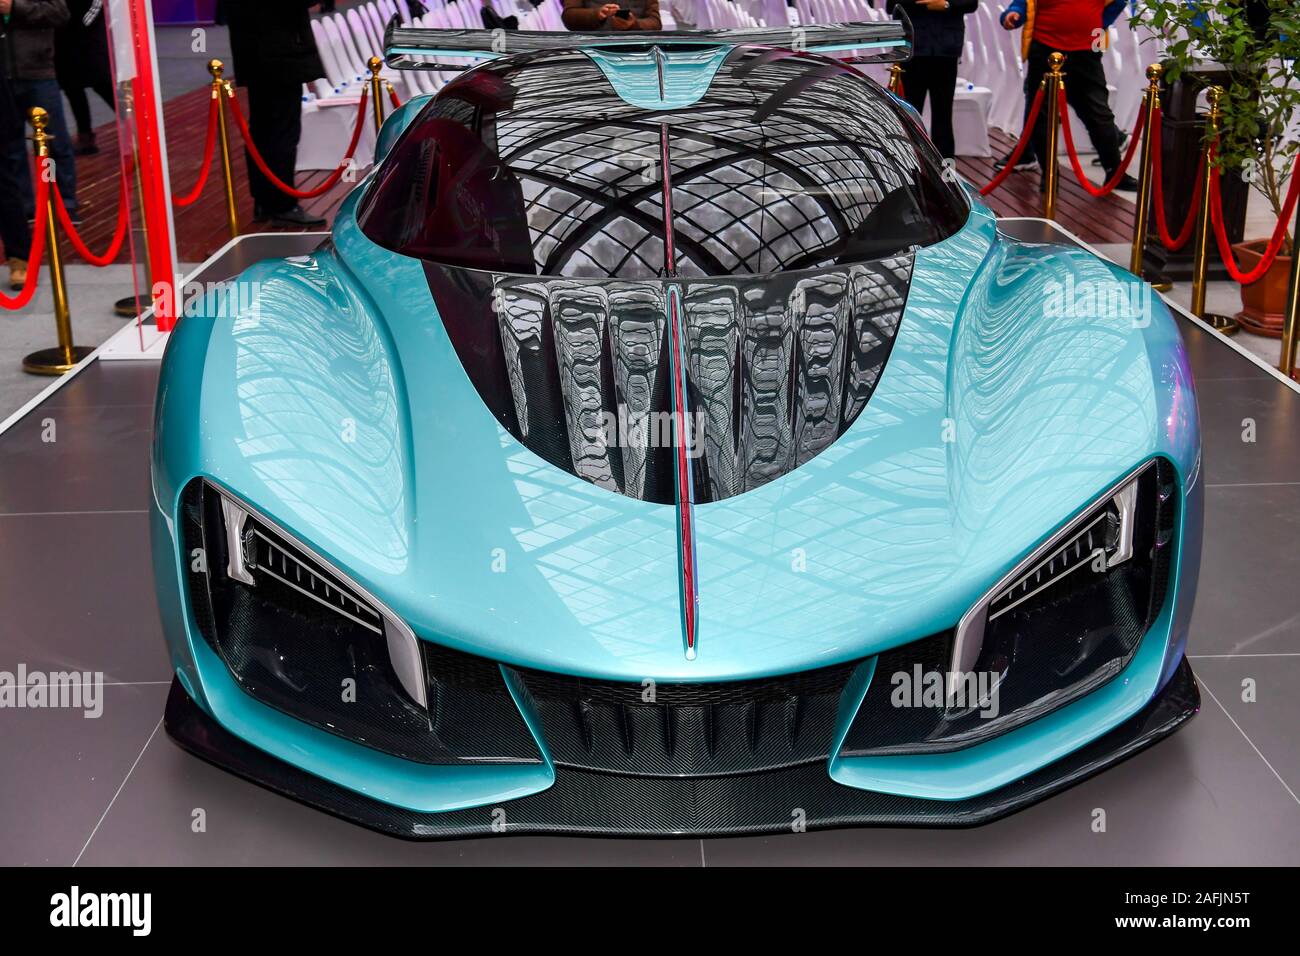 A Hongqi S9 sports car of FAW is on display during an exhibition in Zhengzhou City, central China's Henan Province on December 14th, 2019. Equipped wi Stock Photo